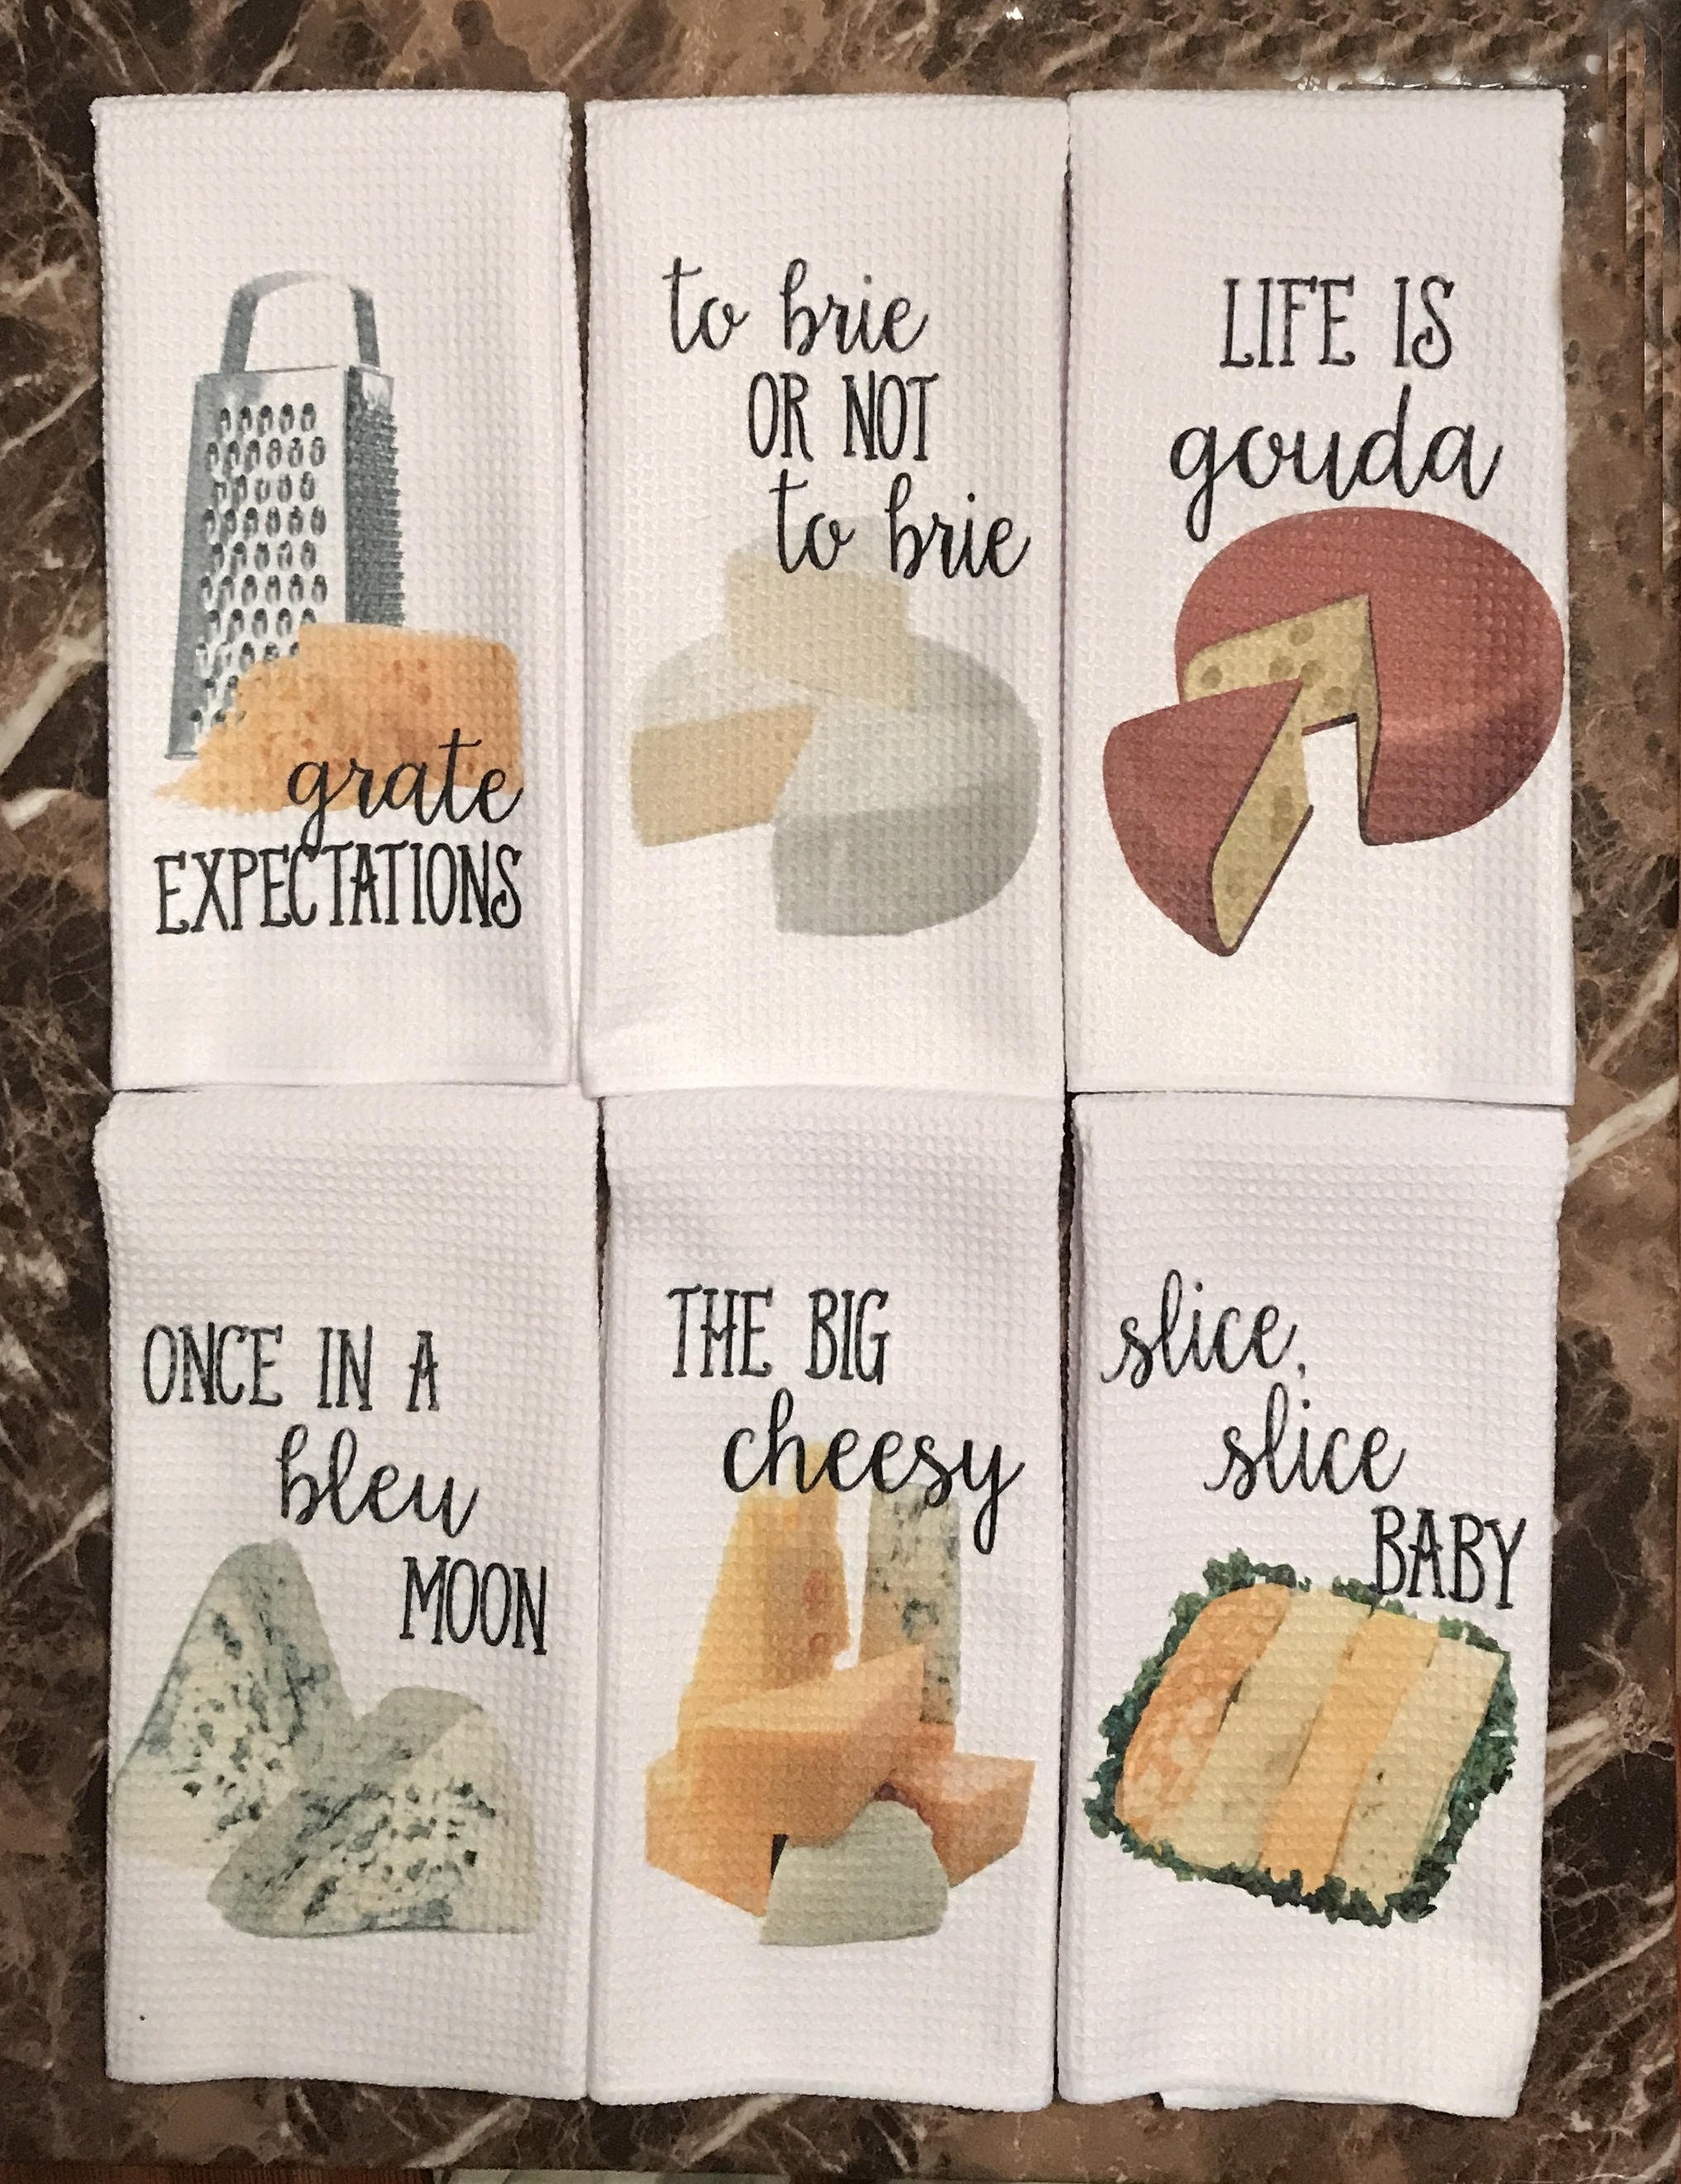 Funny Tea Towels Gift for Foodie Unique Kitchen Towel Gift for Wedding  Shower Funny Hostess Gift Funny Kitchen Decor 